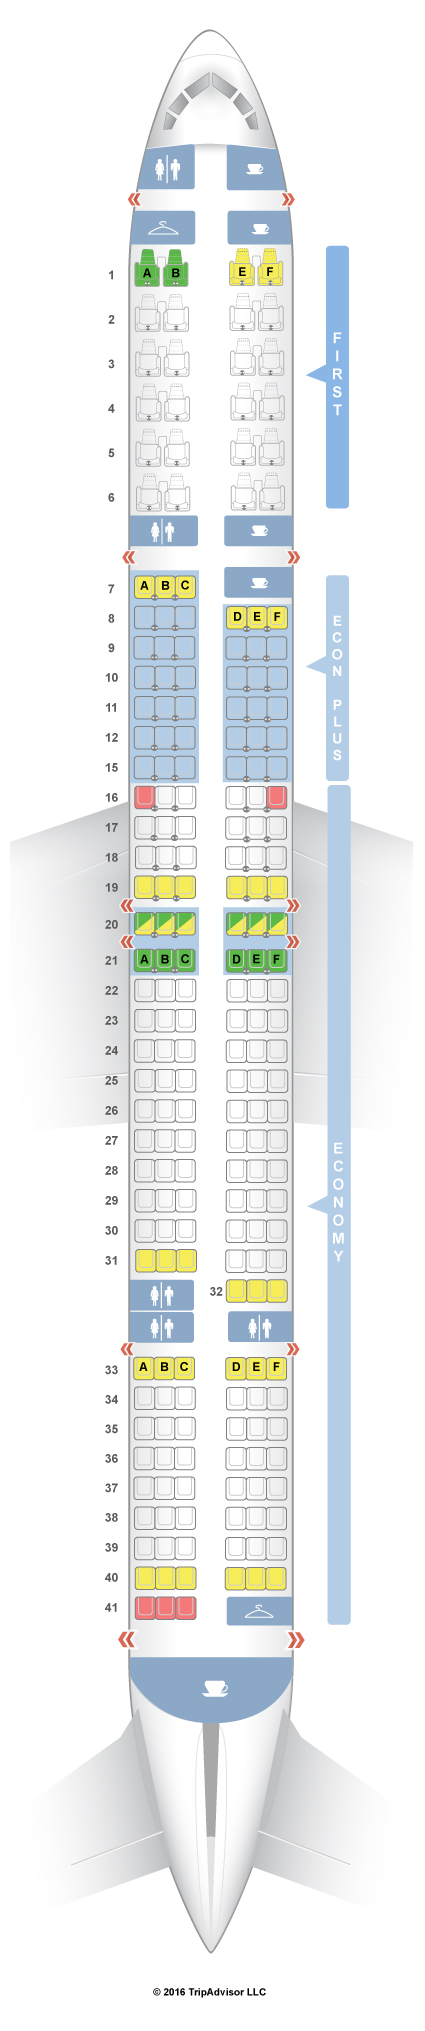 united airlines seating chart boeing 757 300